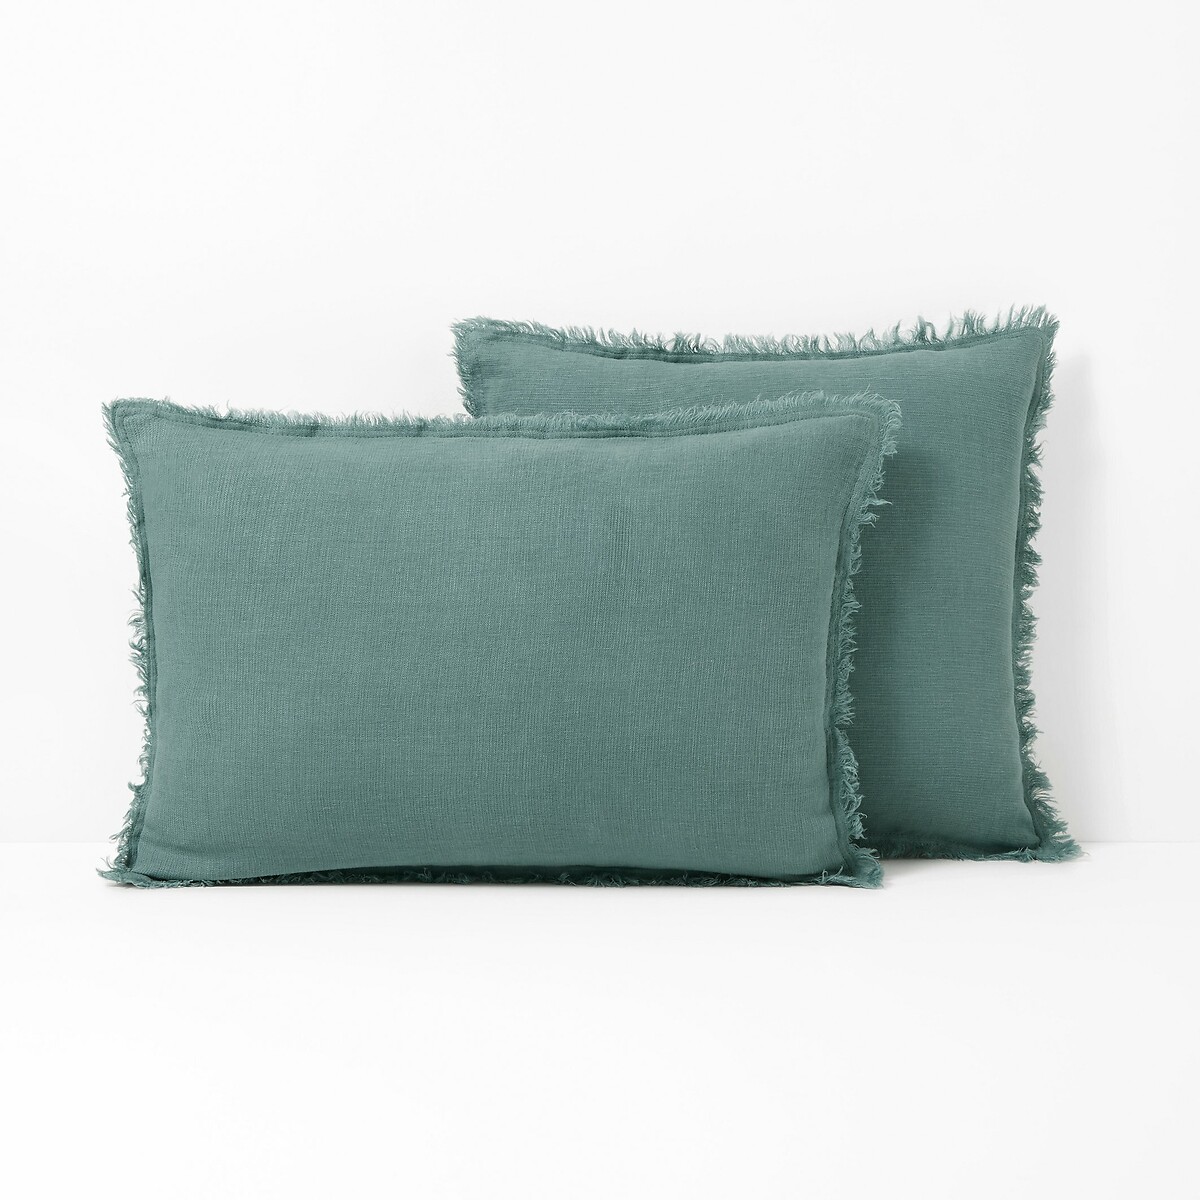 Linange 100% Pre-Washed Linen Cushion Cover